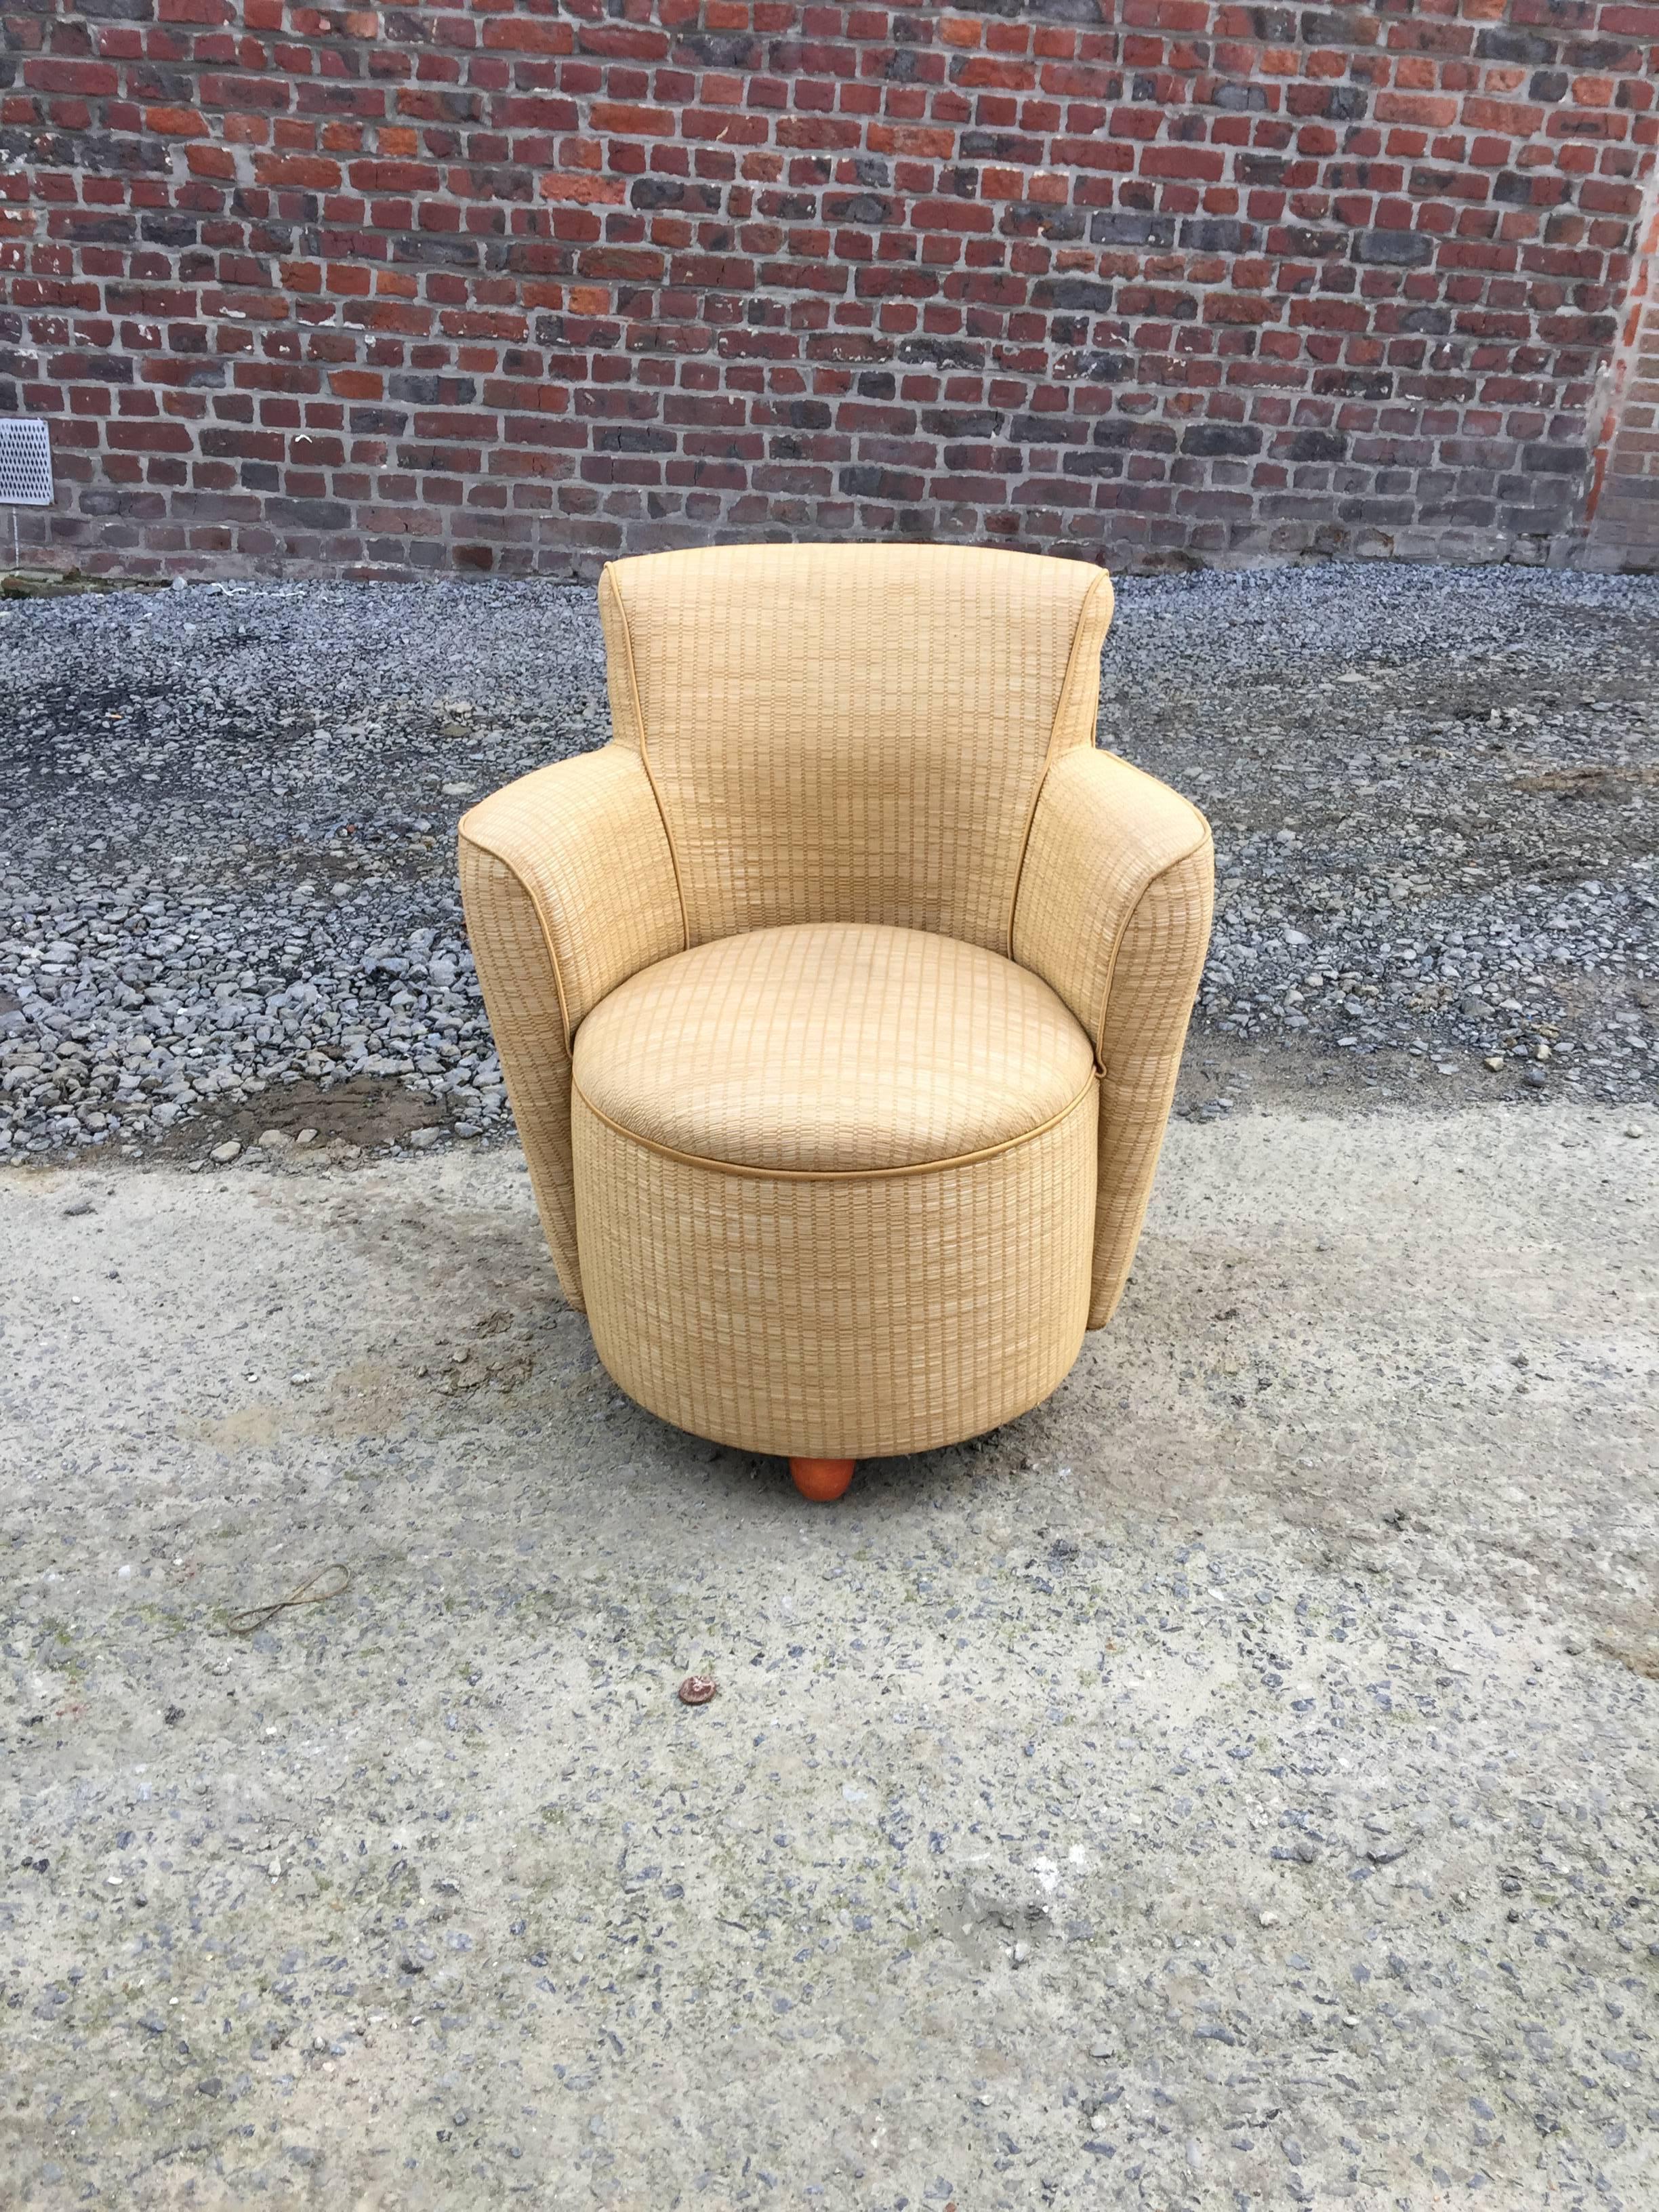 Pair of Art Deco armchairs, circa 1950
Straw yellow fabric on very good condition.